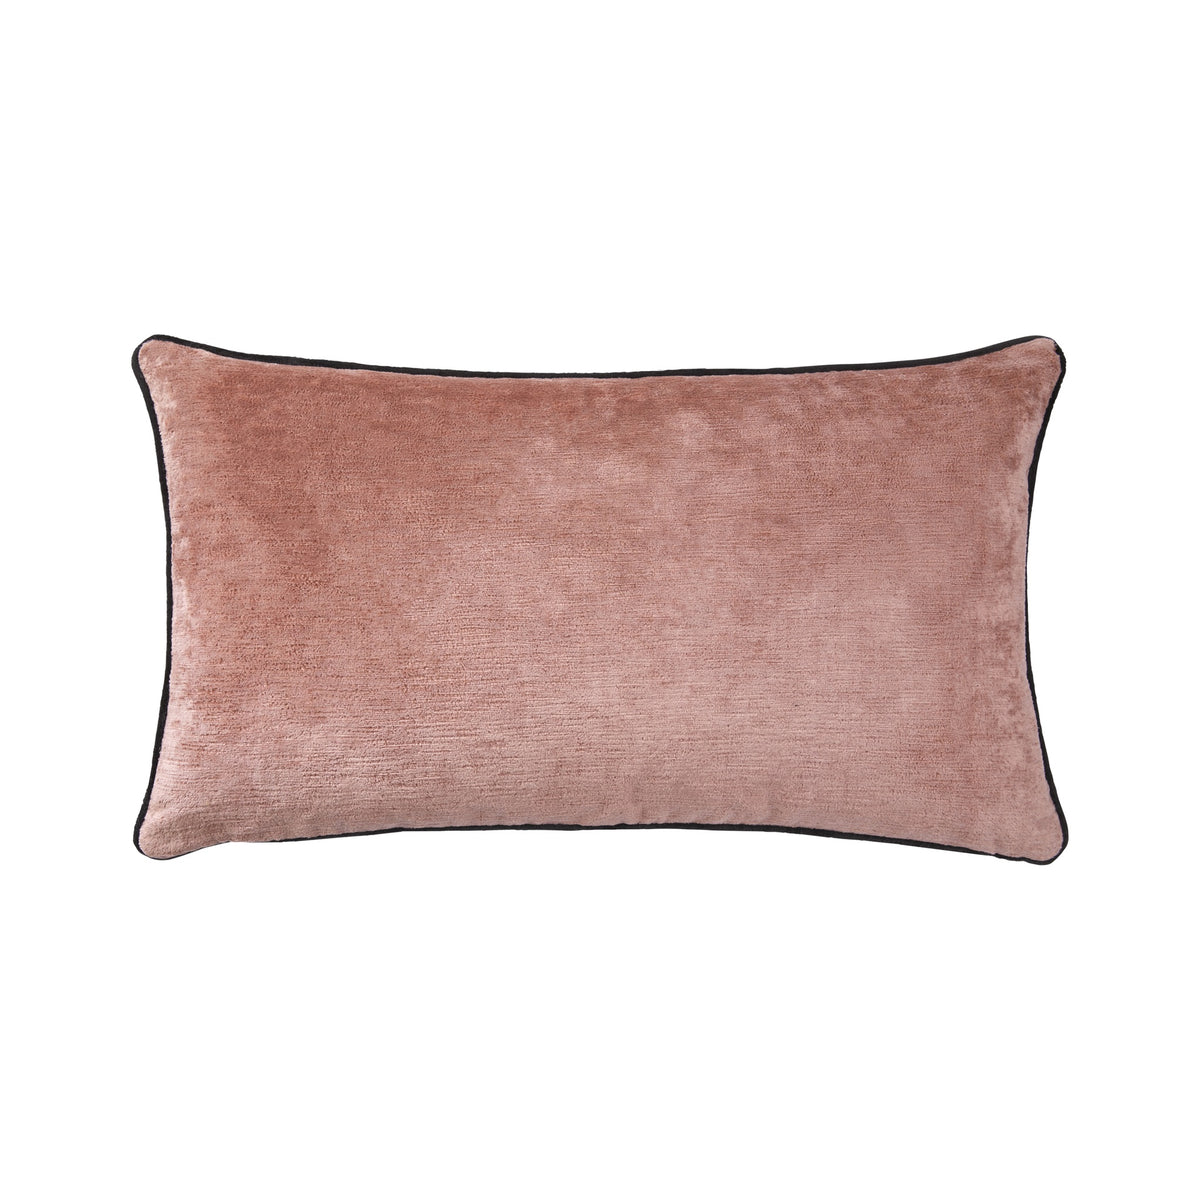 Silo Image of Yves Delorme Iosis Boromee Rectangle Decorative Pillow in Parme Color